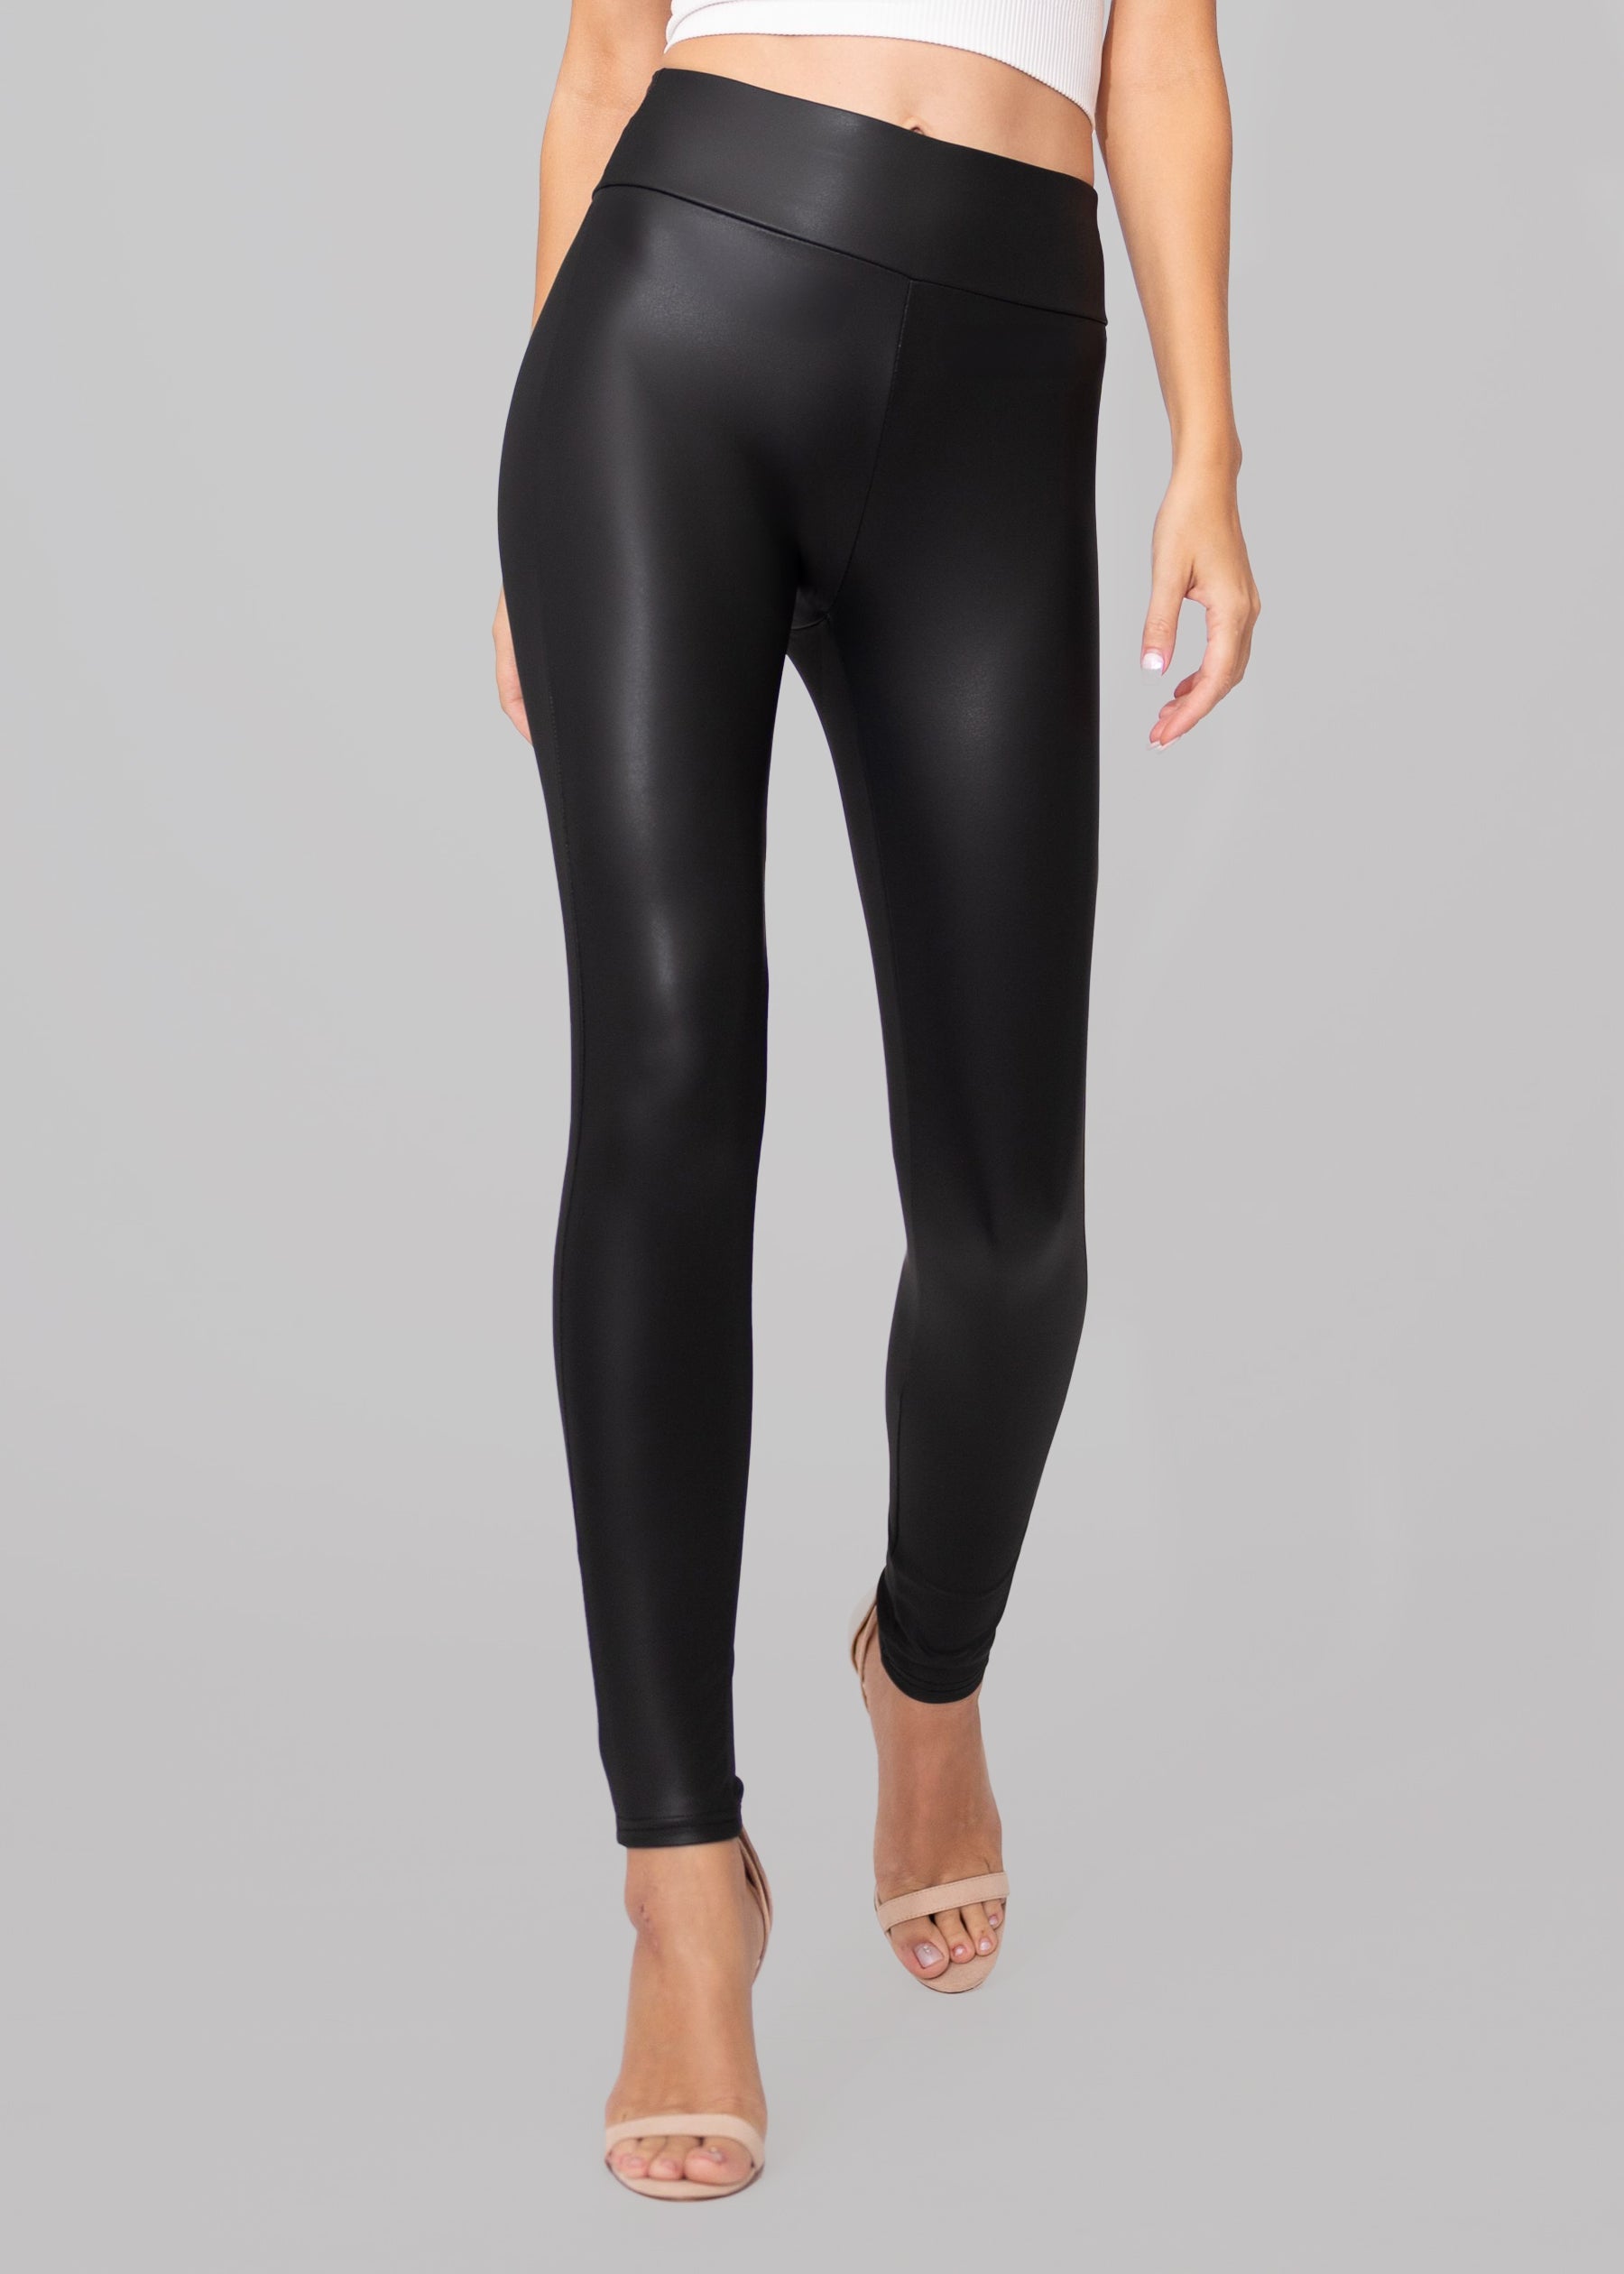 Spanx Womens Faux Leather Leggings